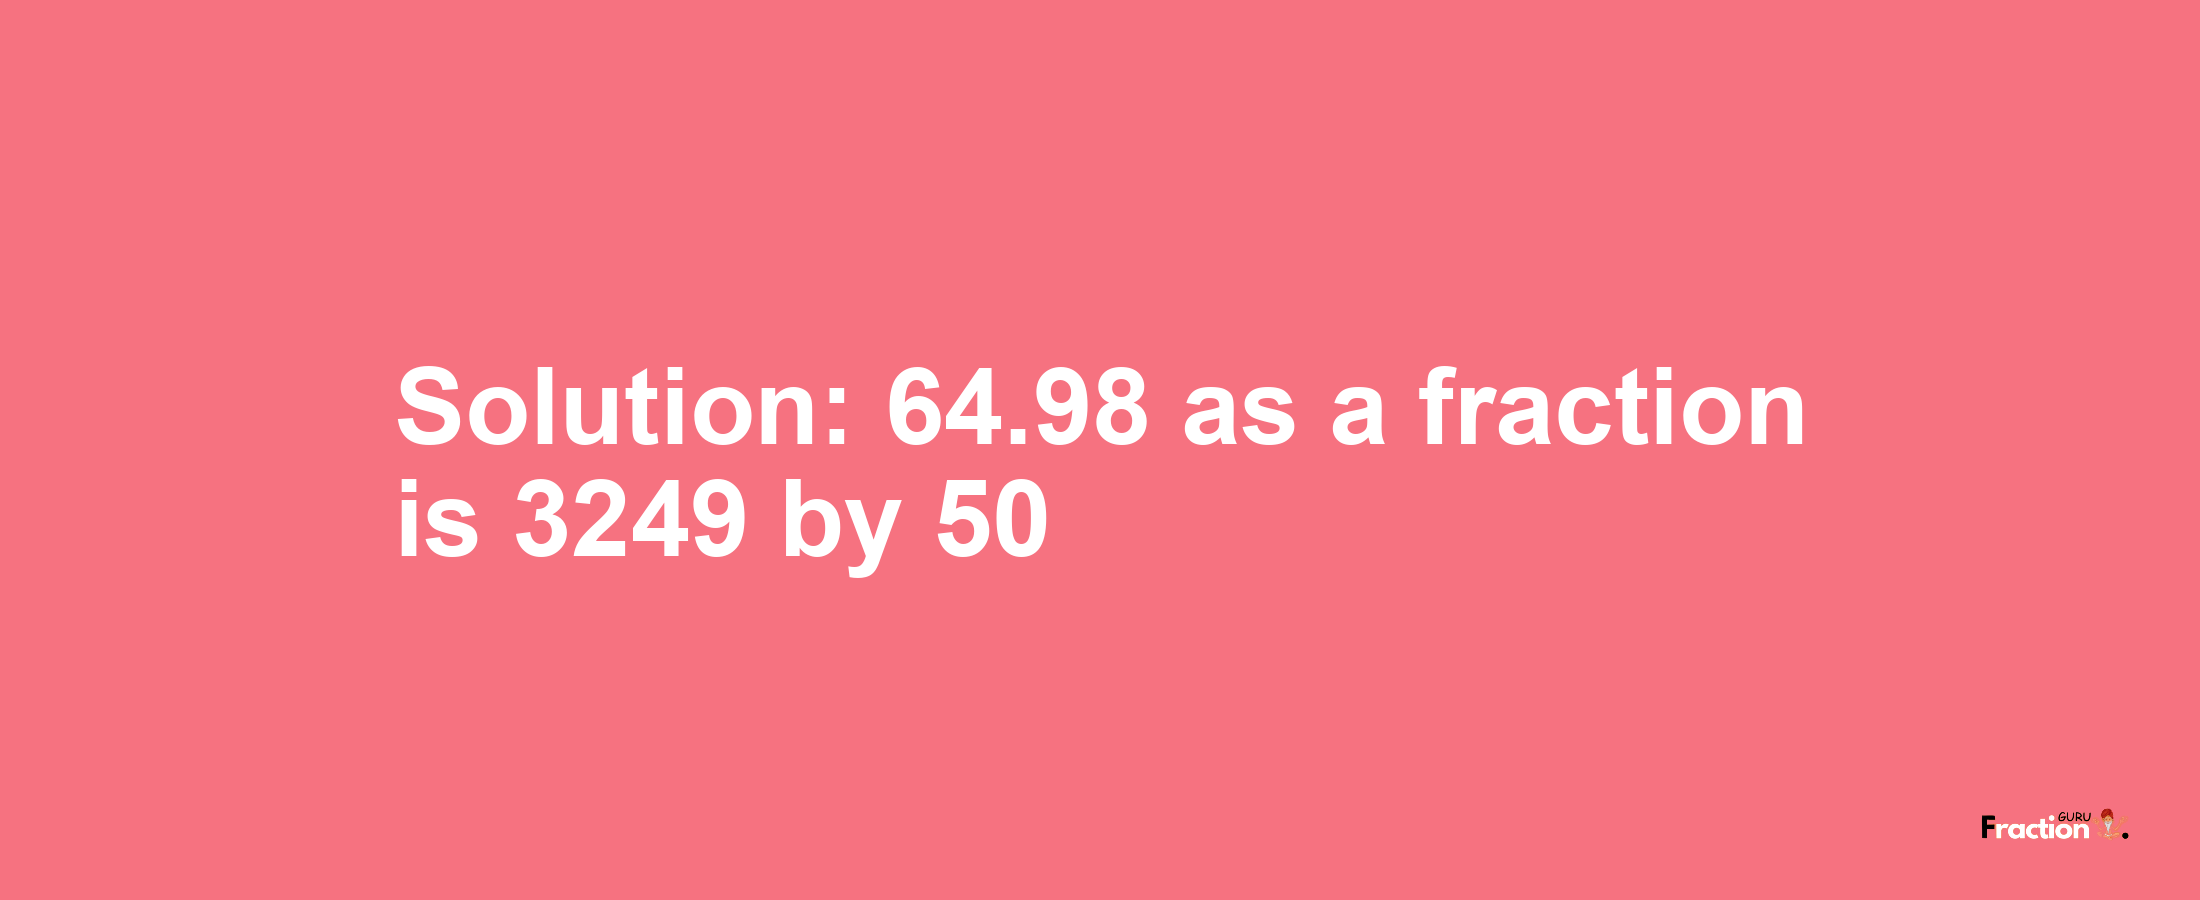 Solution:64.98 as a fraction is 3249/50